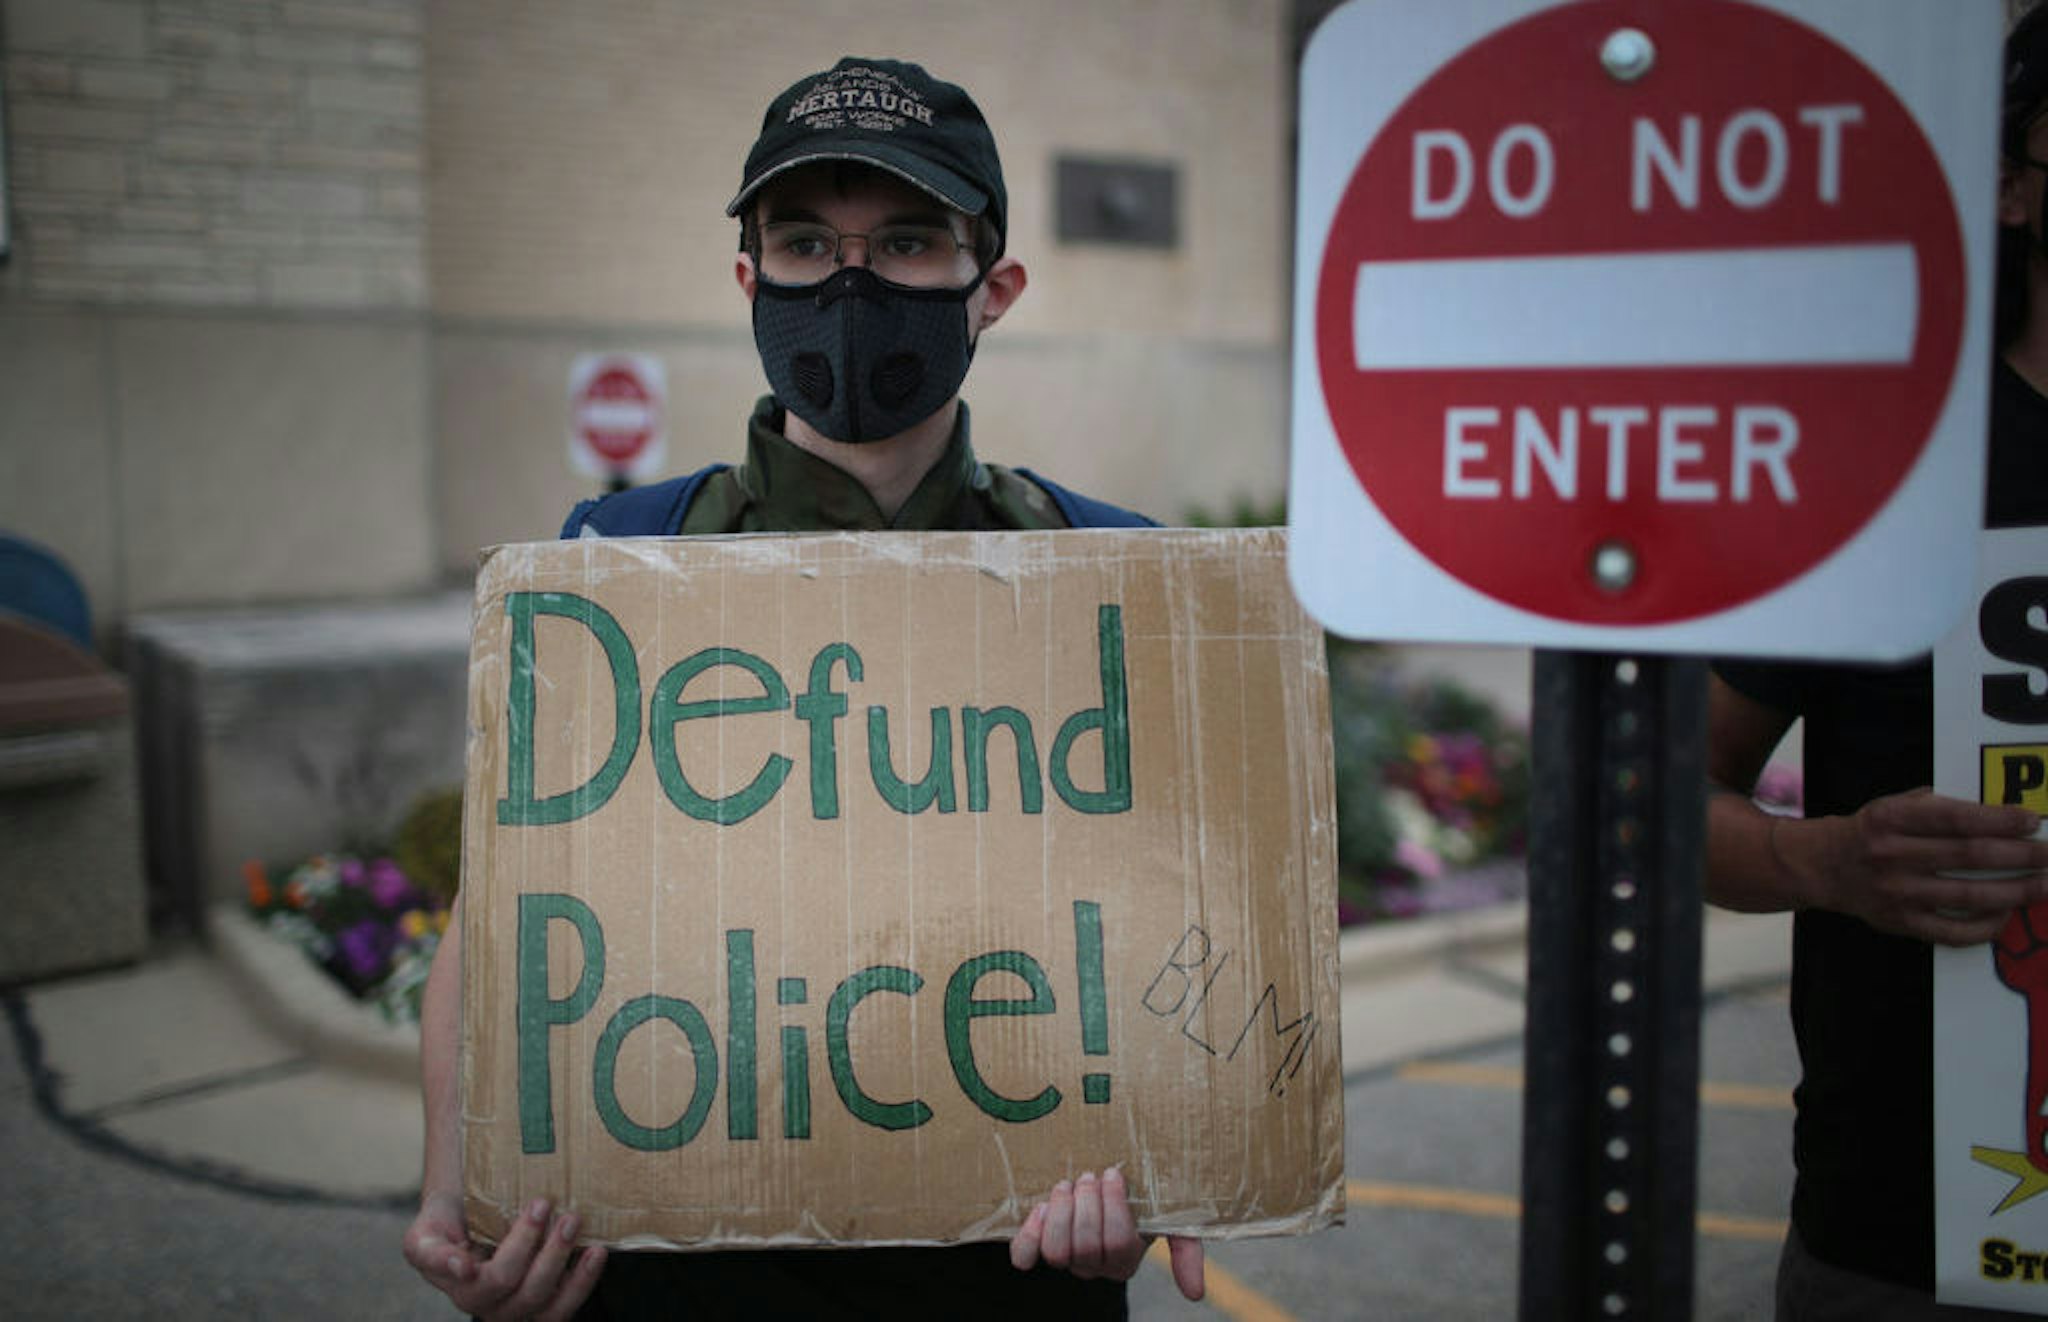 A small group of peaceful demonstrators protesting the shooting of Jacob Blake hold a rally on August 28, 2020 in Kenosha, Wisconsin. Blake was shot seven times in the back in front of his three children by a police officer. The shooting has led to several days of rioting and protests in the city. (Photo by Scott Olson/Getty Images)